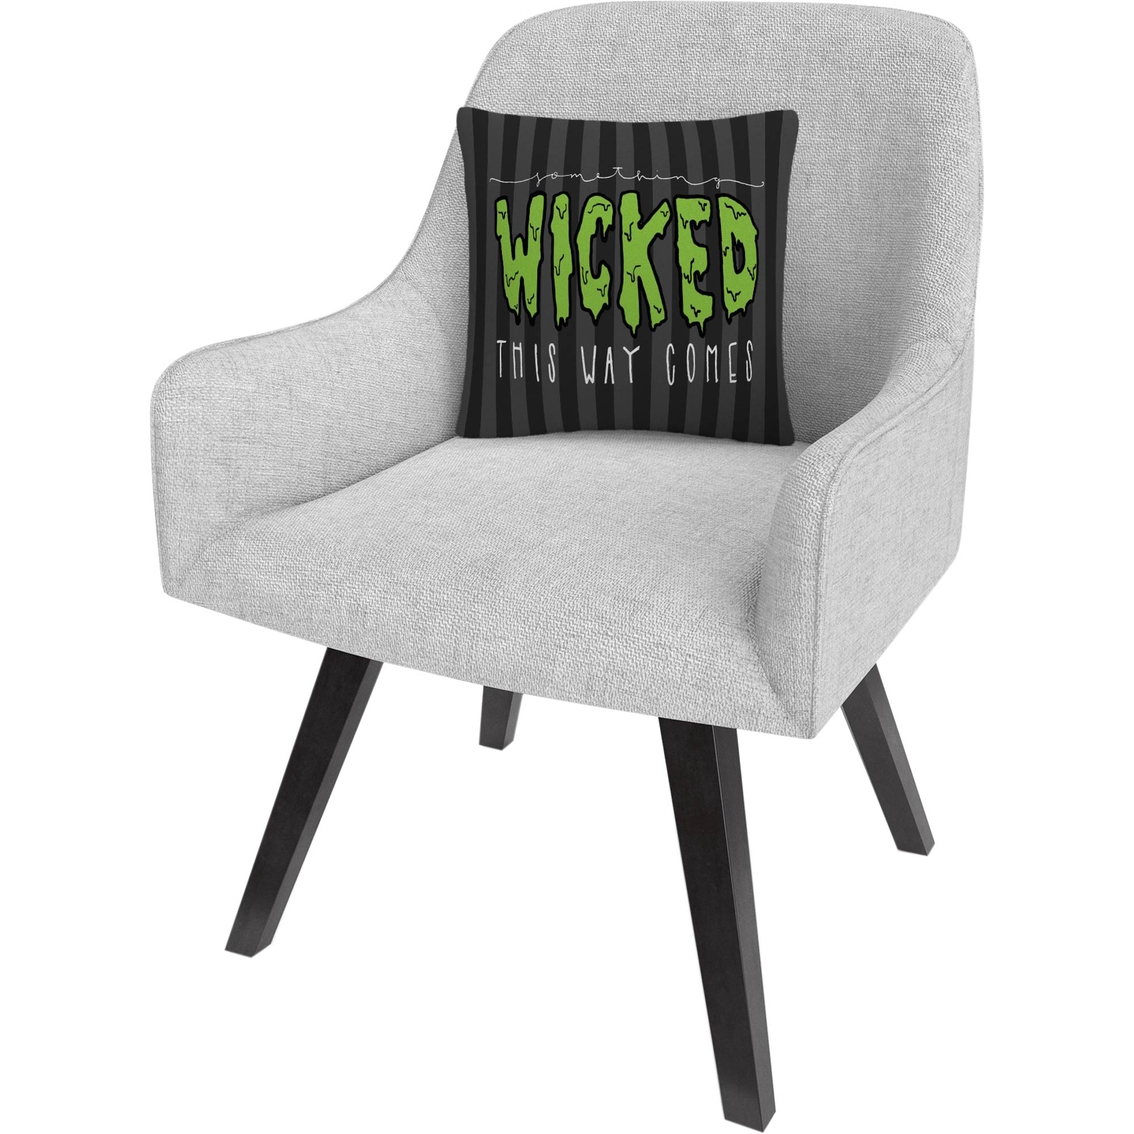 Trademark Fine Art Something Wicked This Way Comes Halloween Decorative Pillow - Image 2 of 3